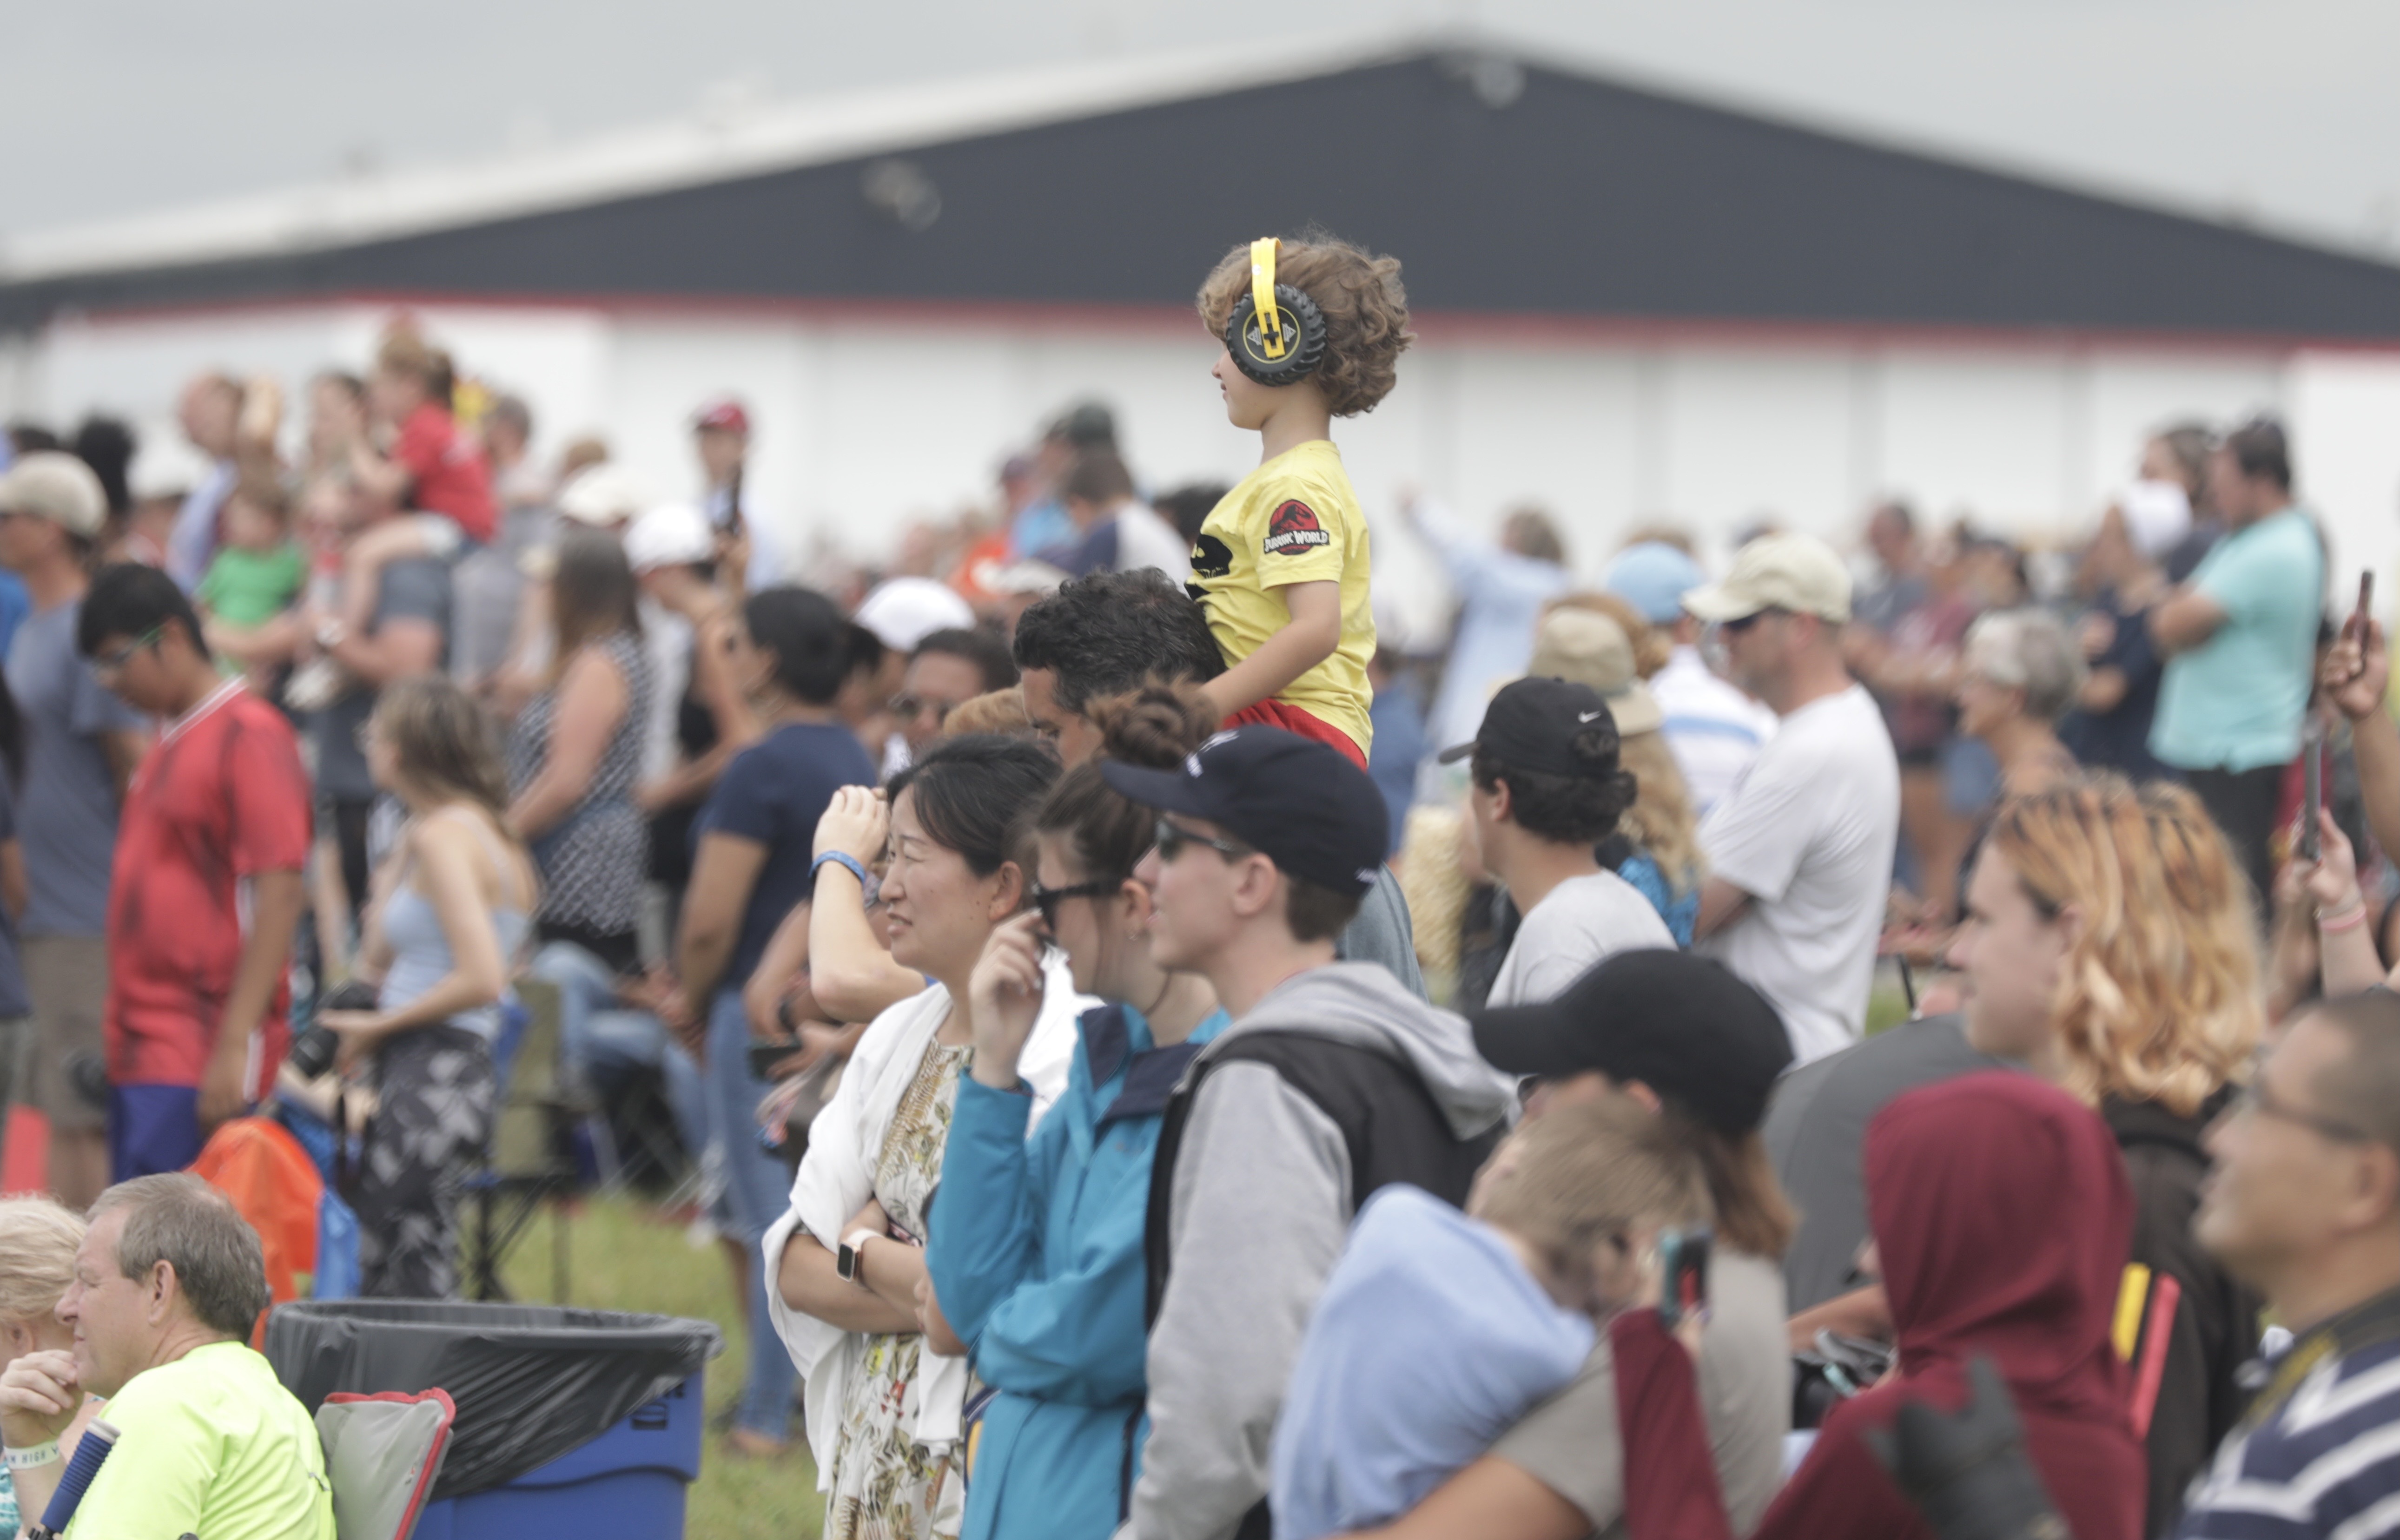 Spectators watch the aerial performances at the 2021 CenterPoint Energy Dayton Air Show.  FILLET